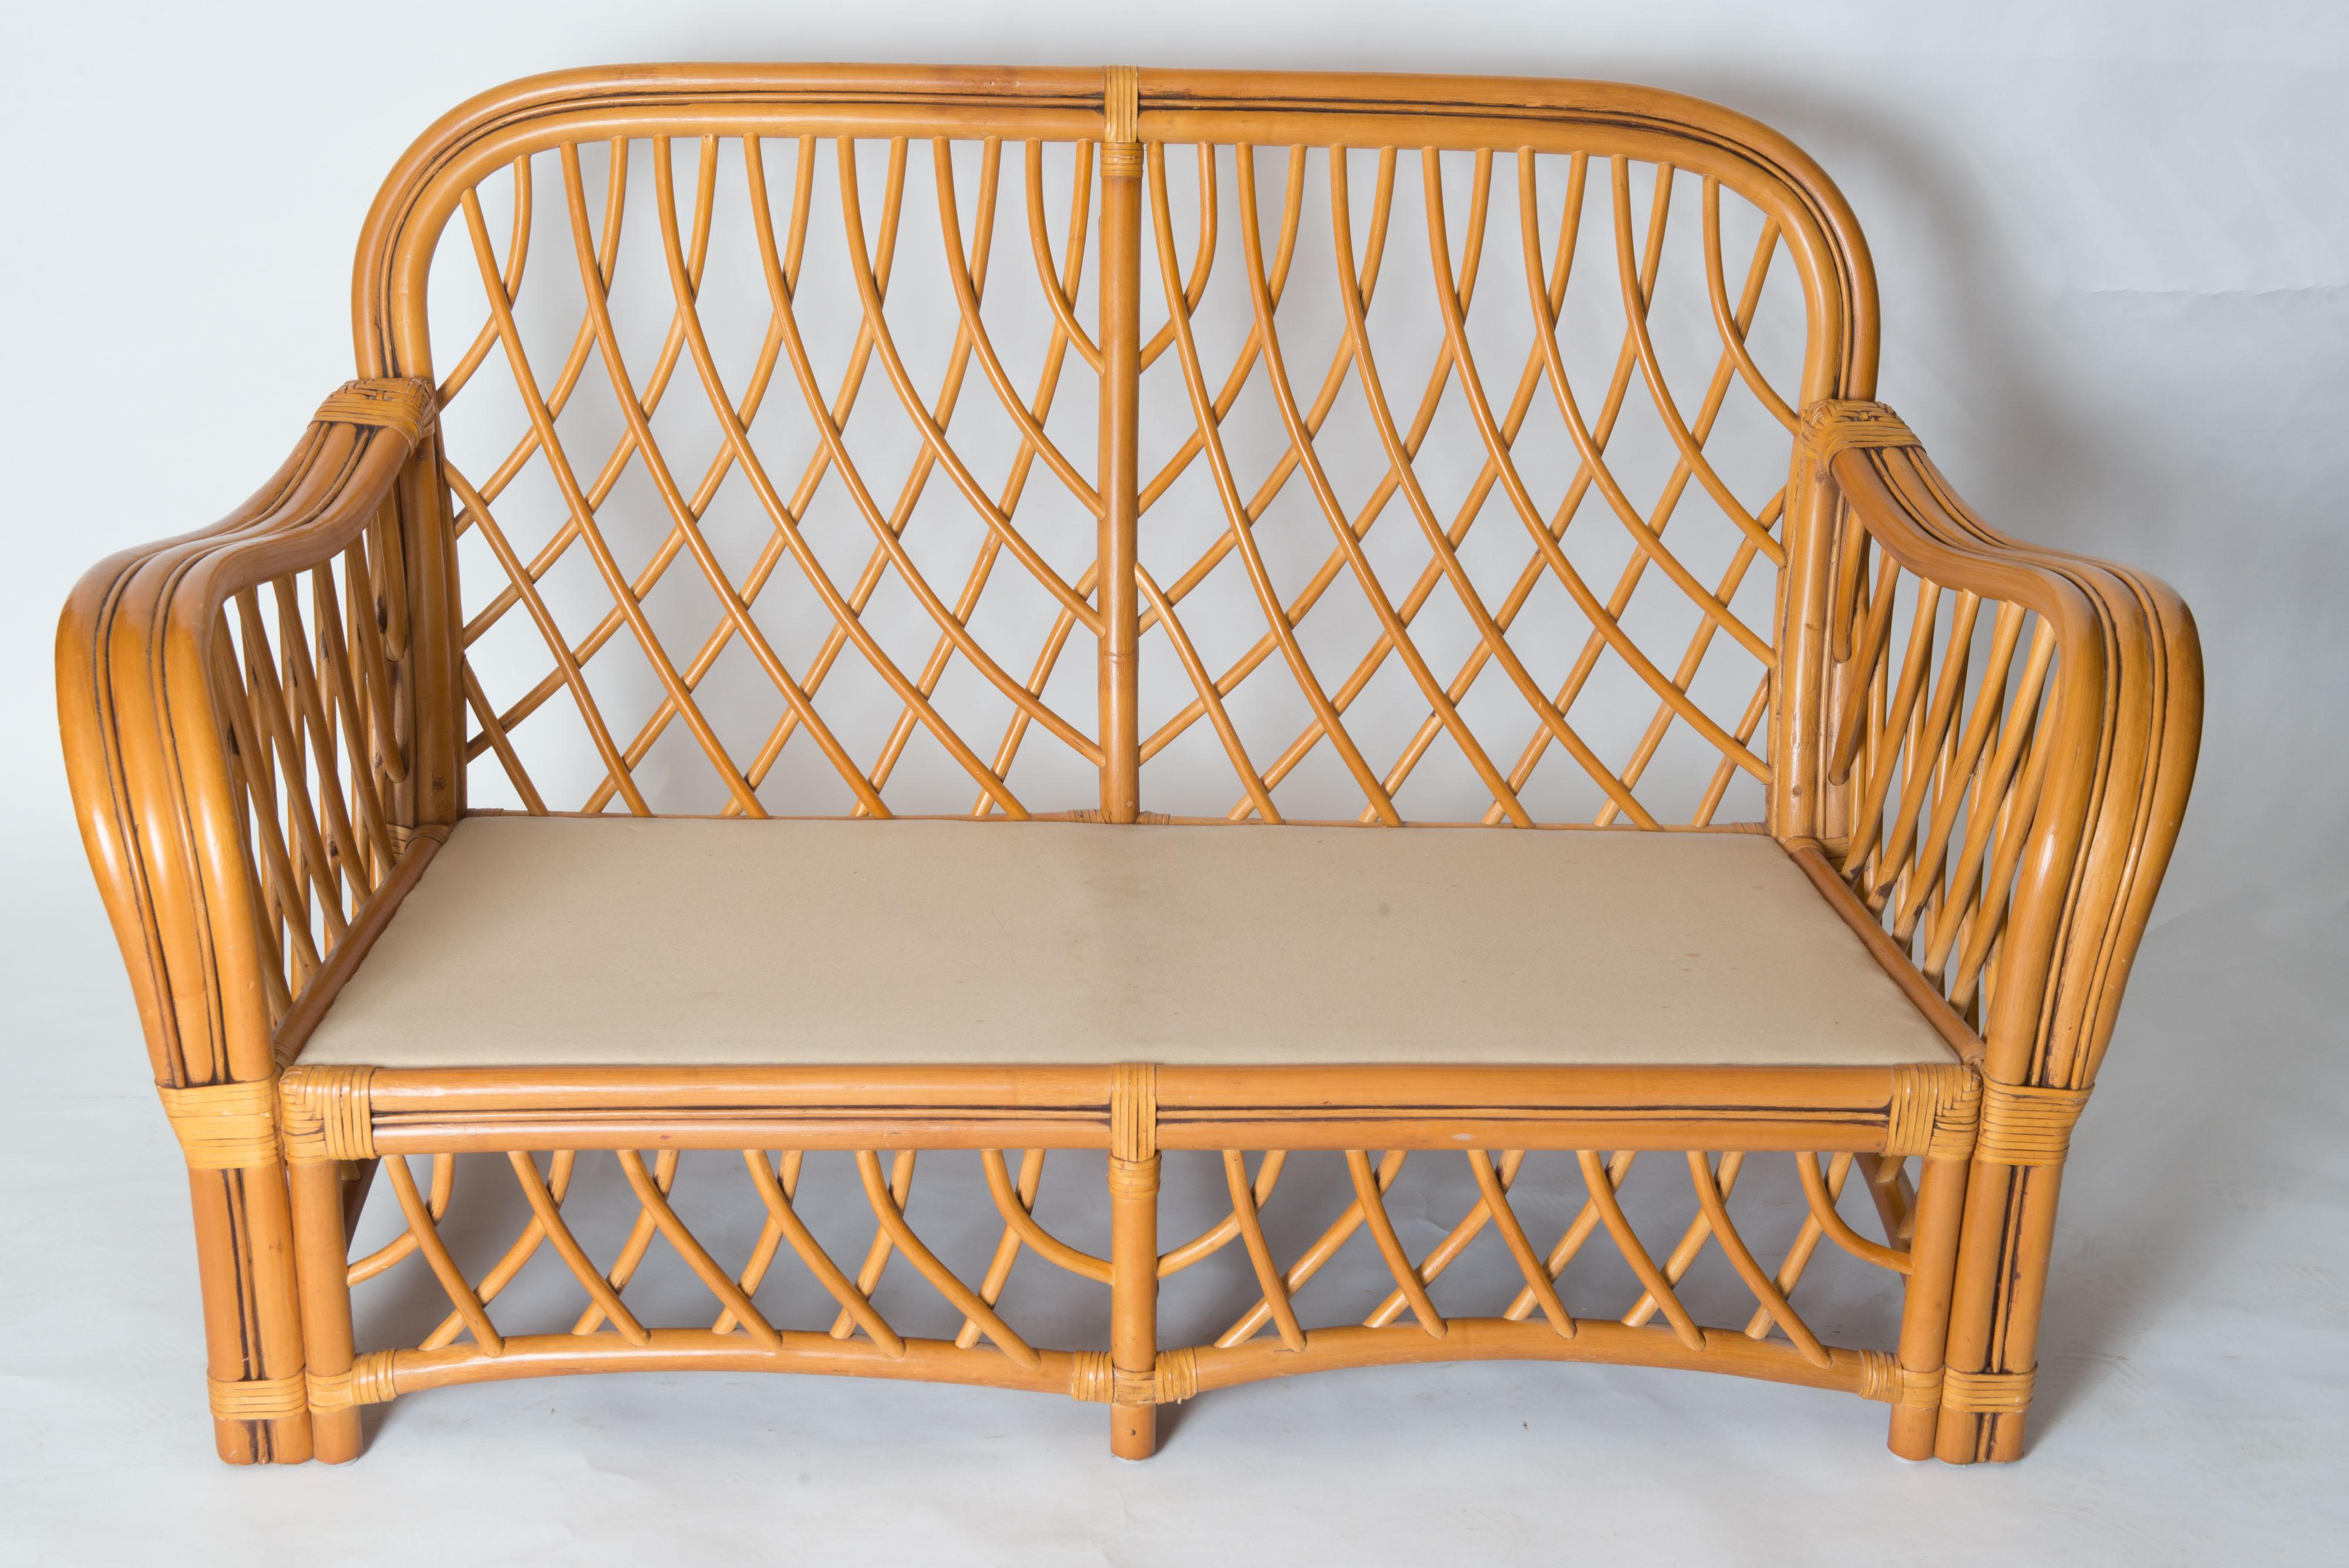 A midcentury, possibly Italian organic modern loveseat in handcrafted rattan. Strong and sturdy woven diamond pattern rattan loveseat. This loveseat is in good to excellent condition. This Classic design compliments any decorating style. There are